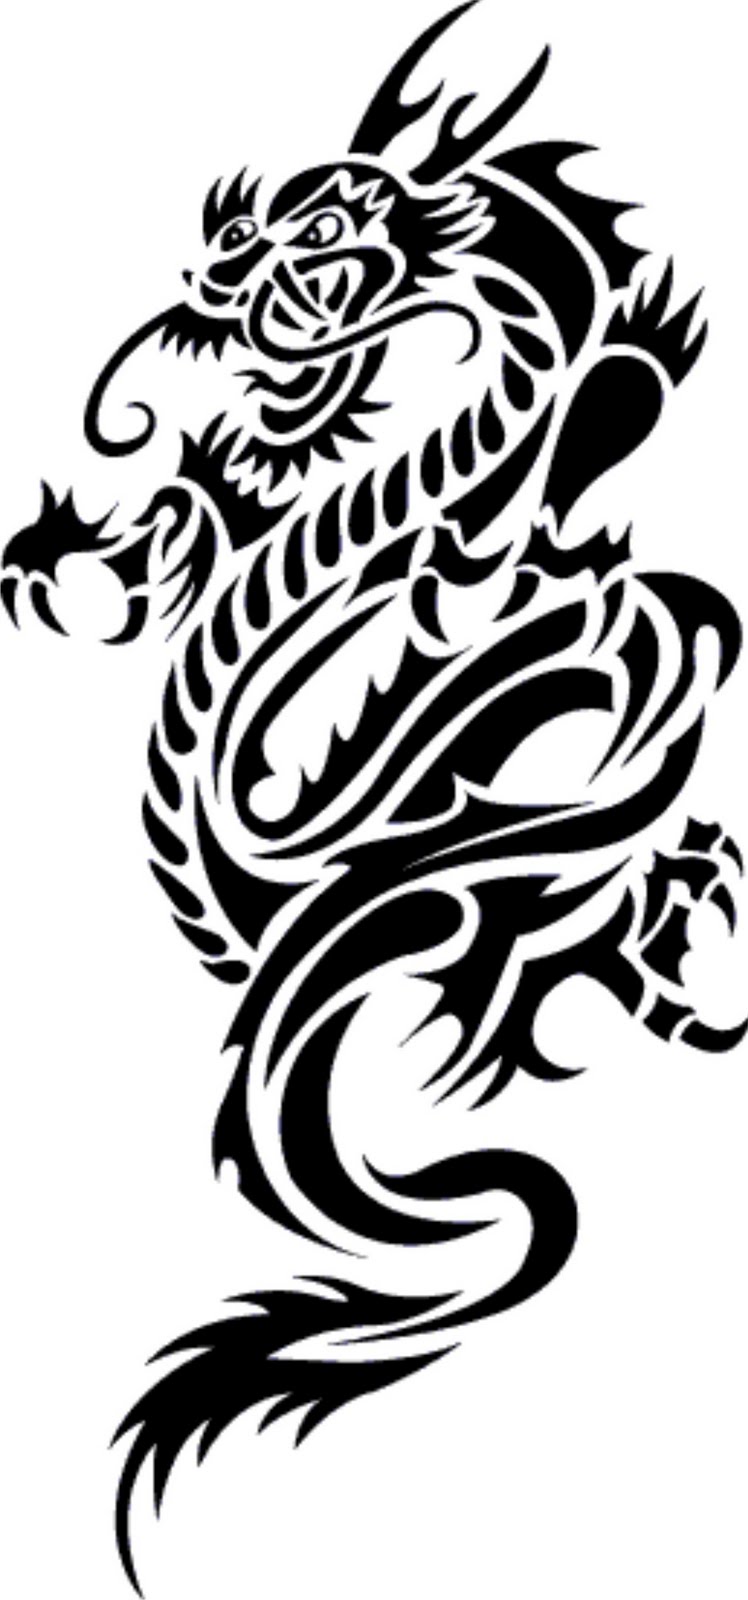 Dragon Tattoos and Designs| Page 46